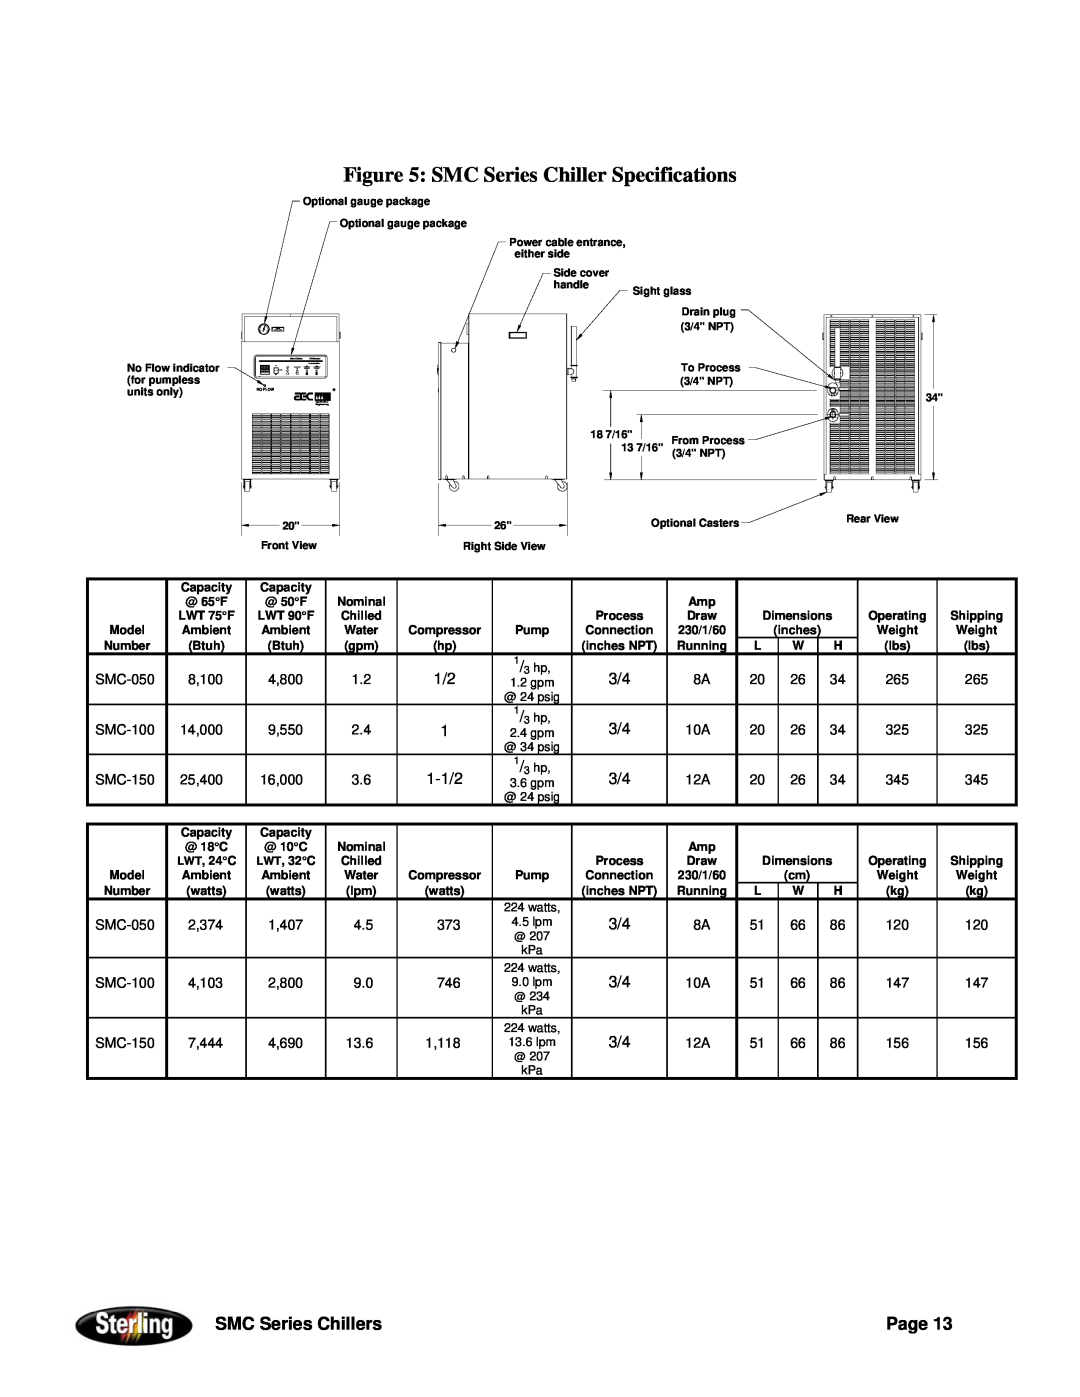 Sterling Power Products 30F to 65F installation manual SMC Series Chiller Specifications, SMC Series Chillers, Page, 1-1/2 